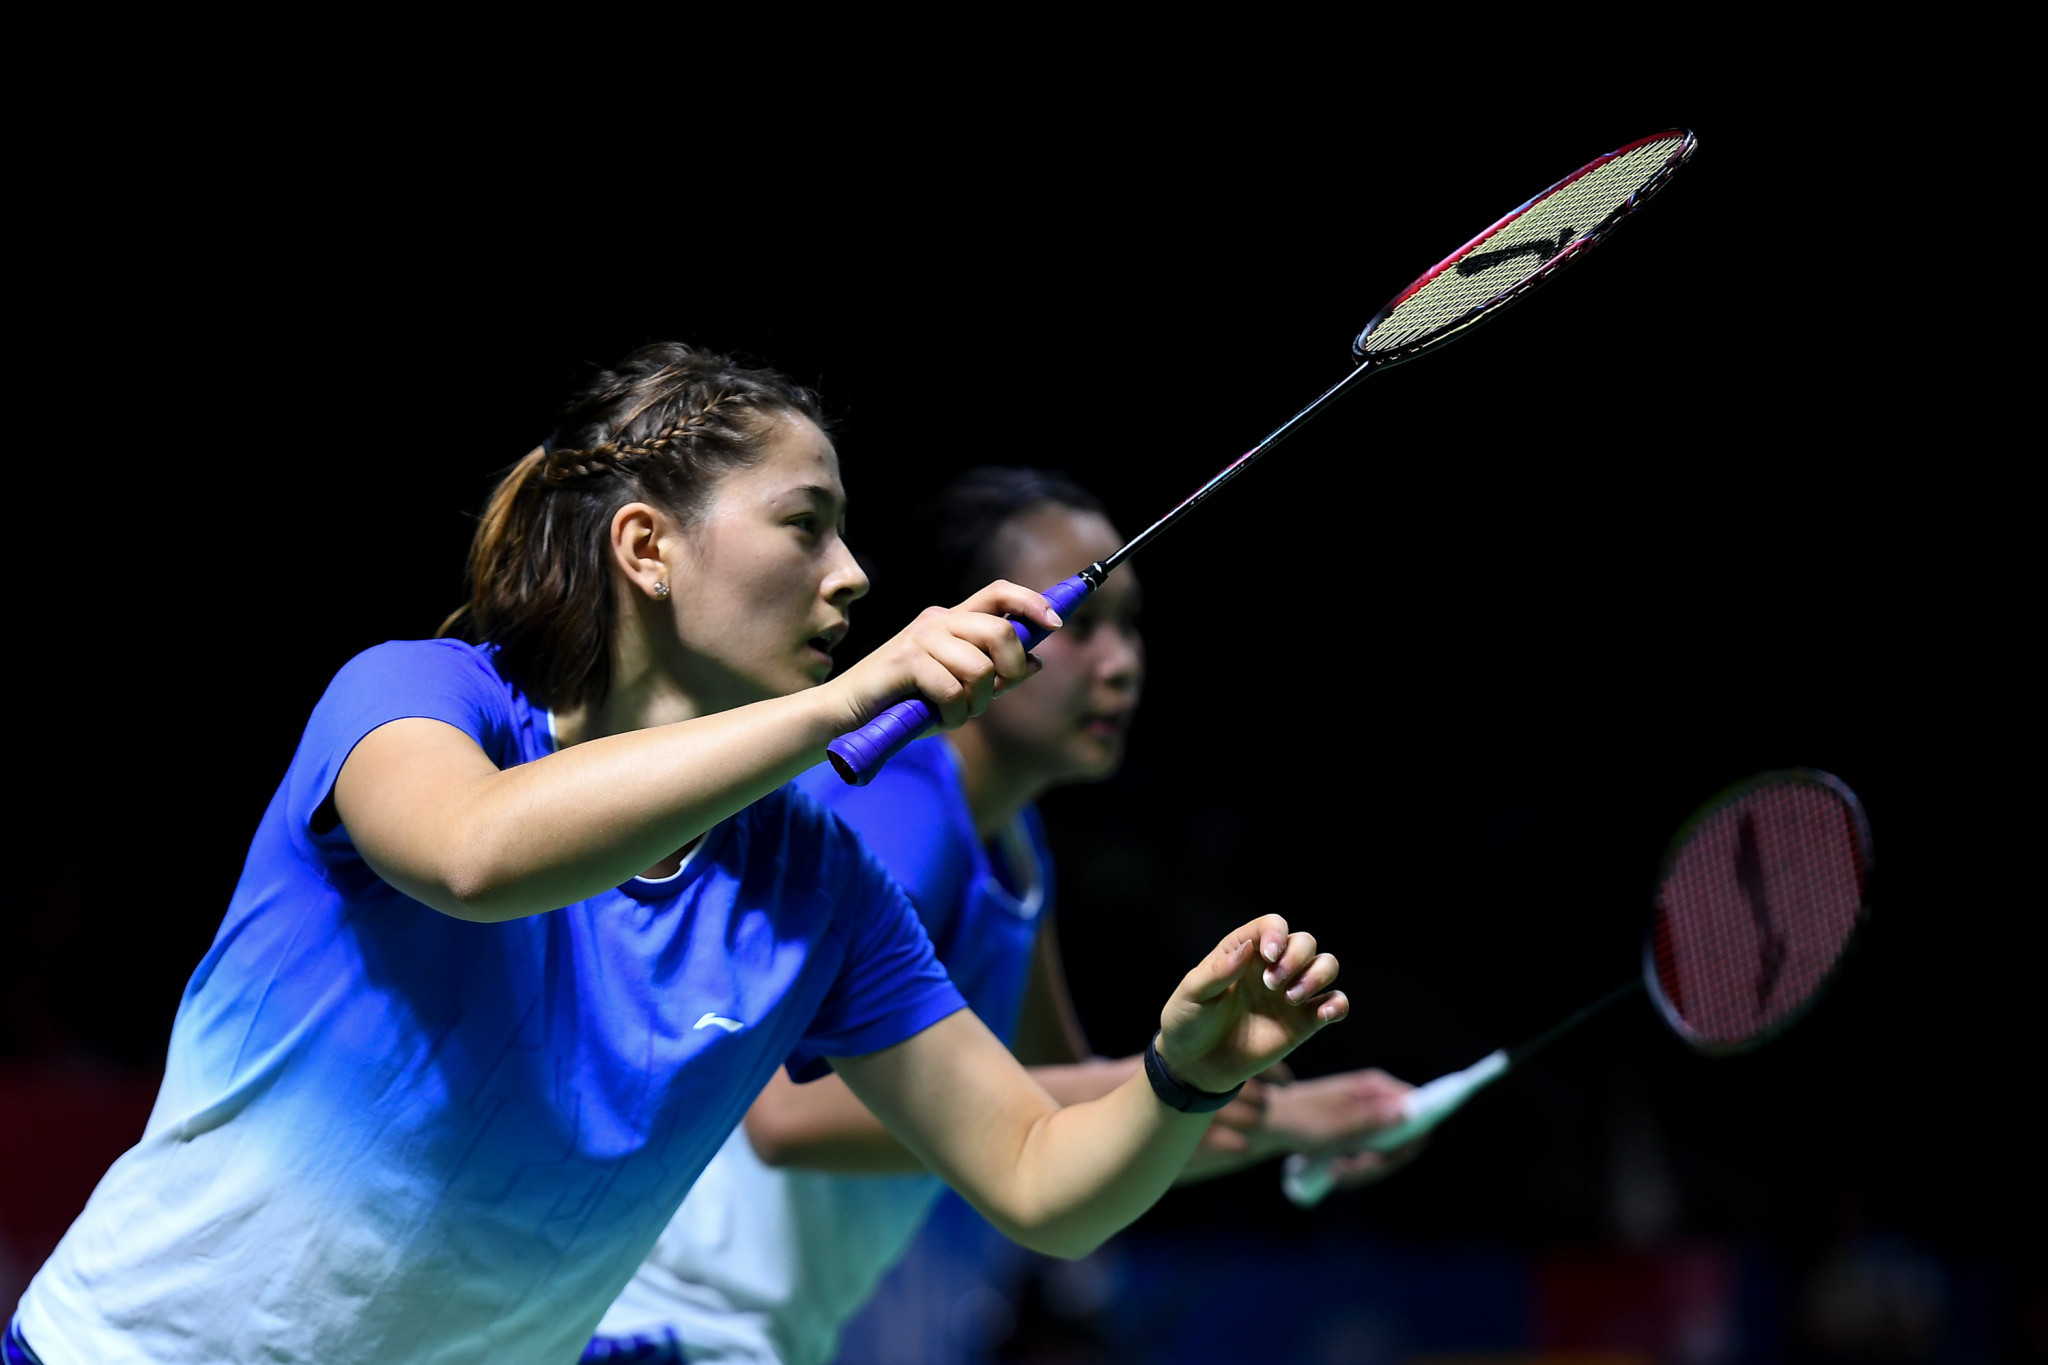 Matches in Thailand were held without spectators last month ©Getty Images